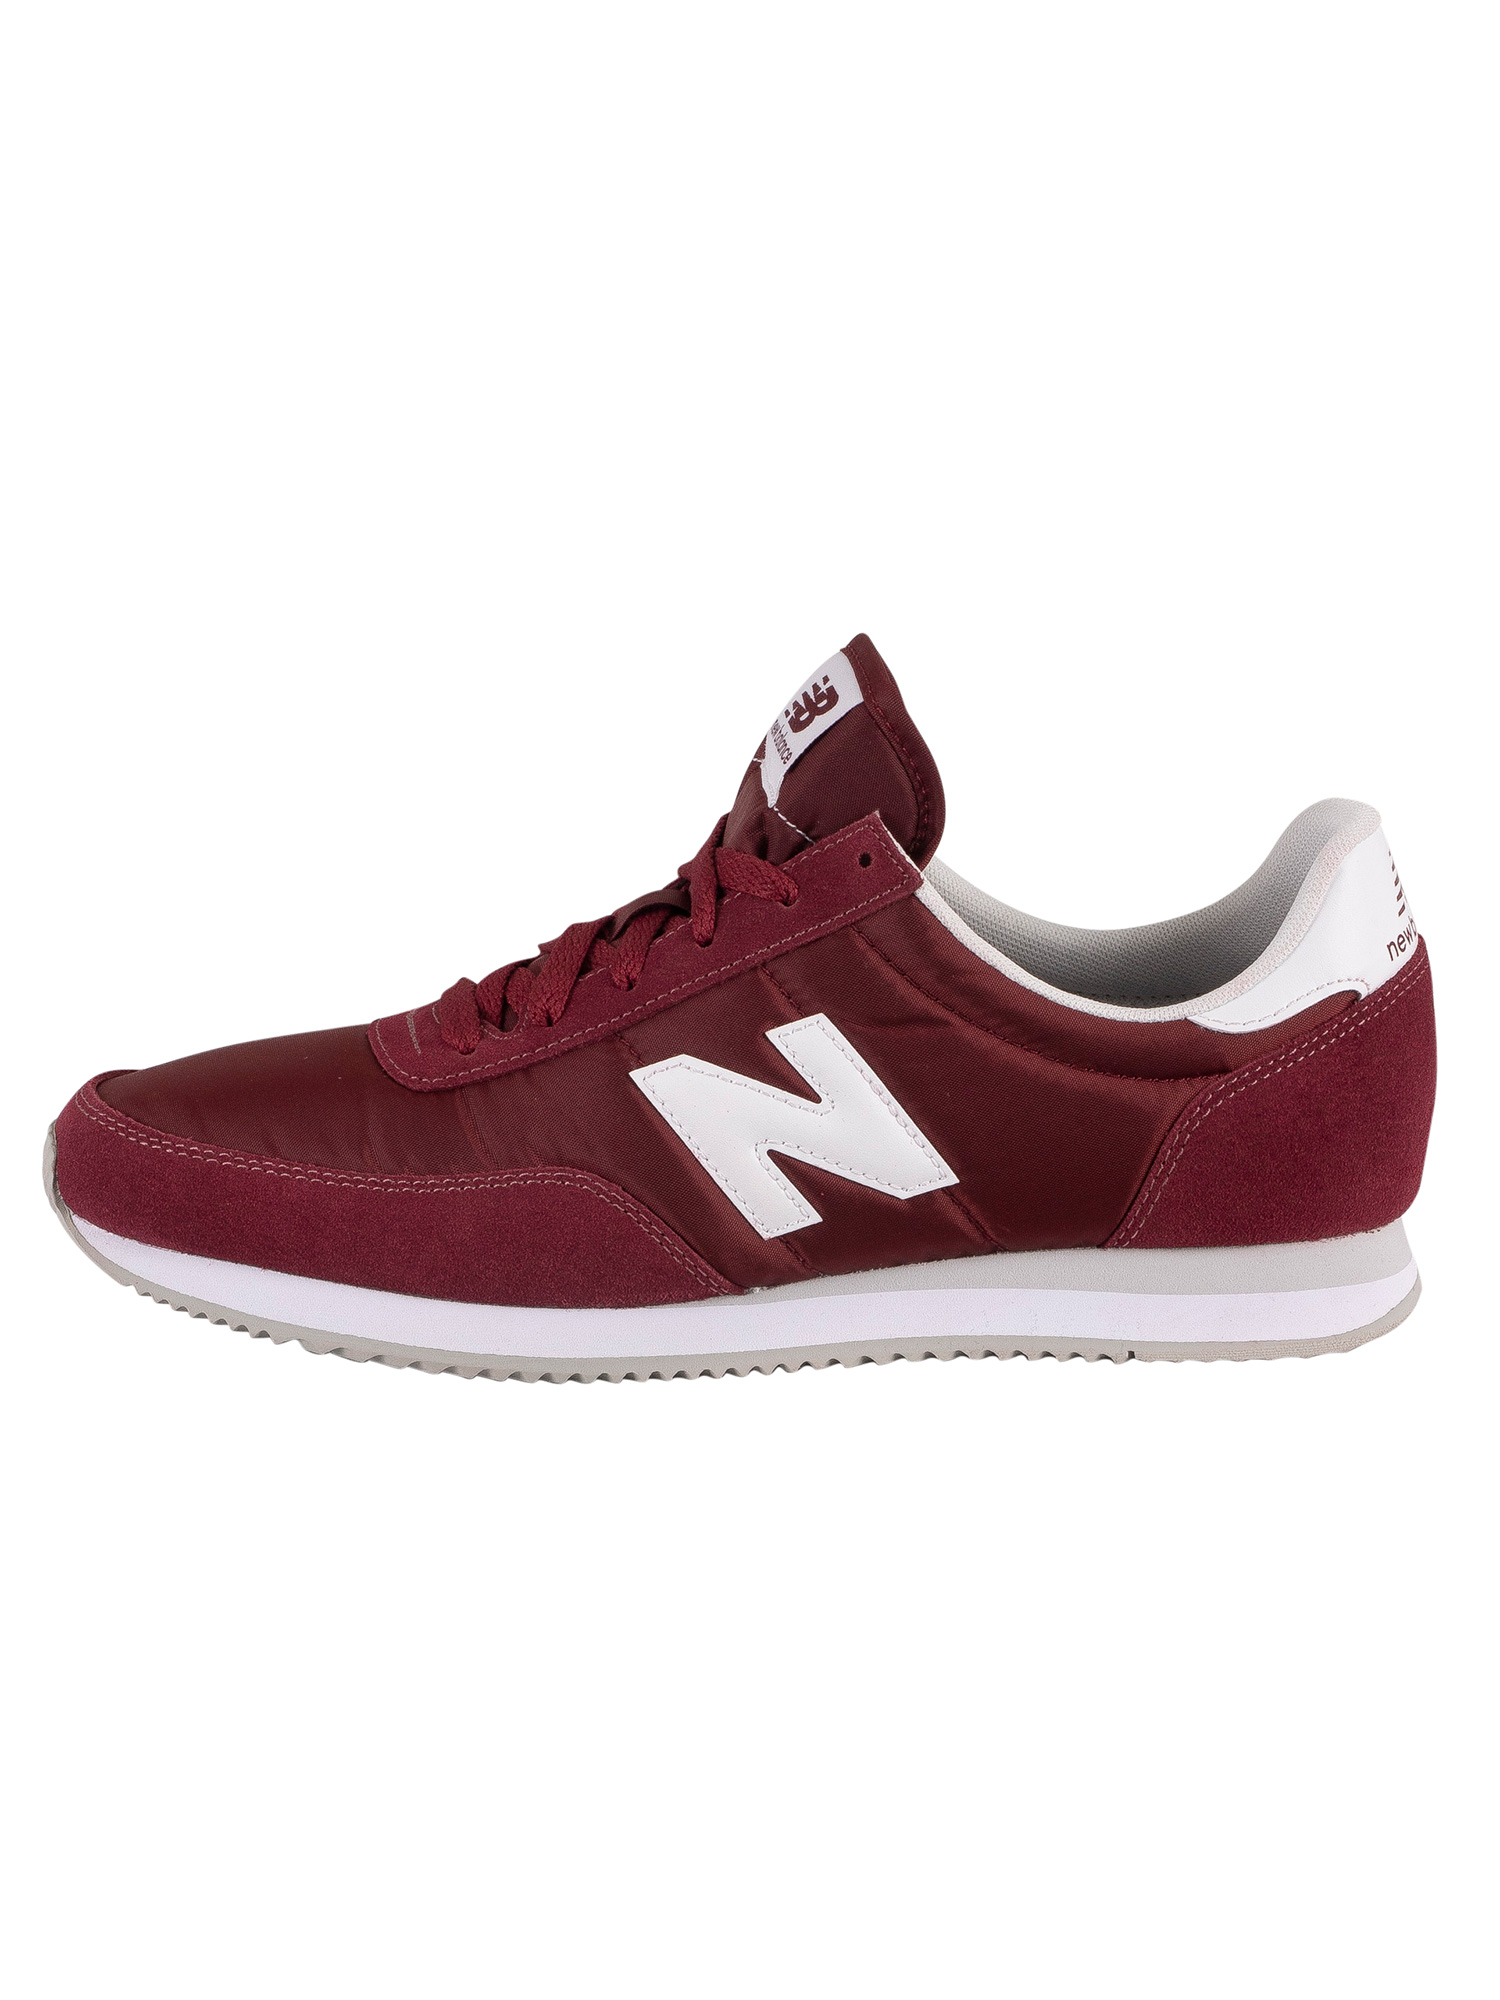 New Balance 720 Heritage Racing Trainers - Classic Burgundy/White | Standout